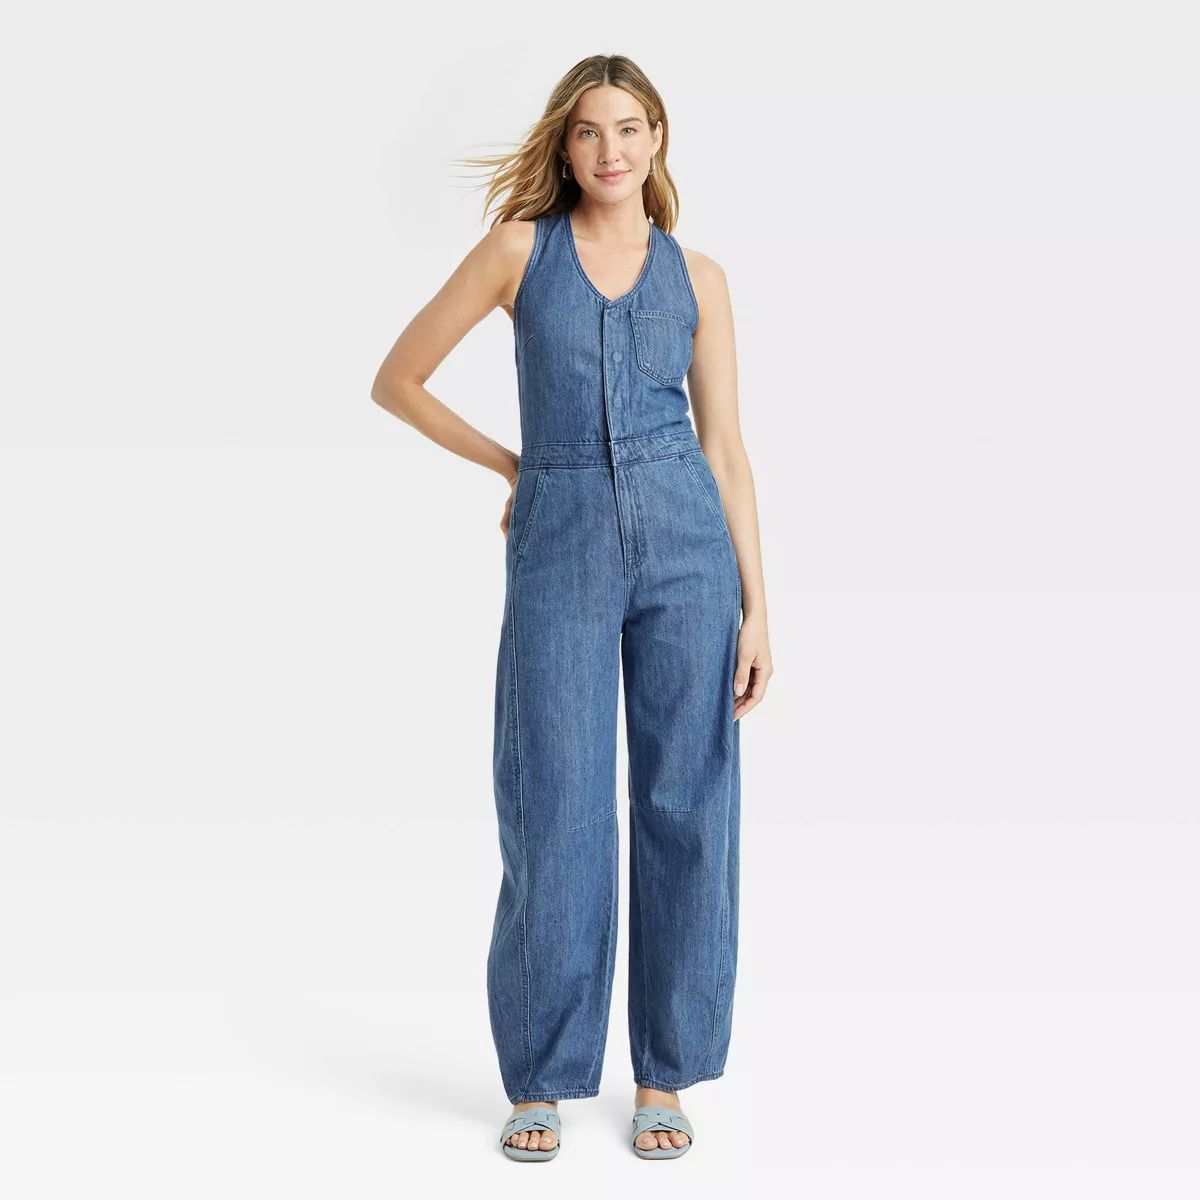 TargetClothing, Shoes & AccessoriesWomen’s ClothingJumpsuits & Rompers | Target